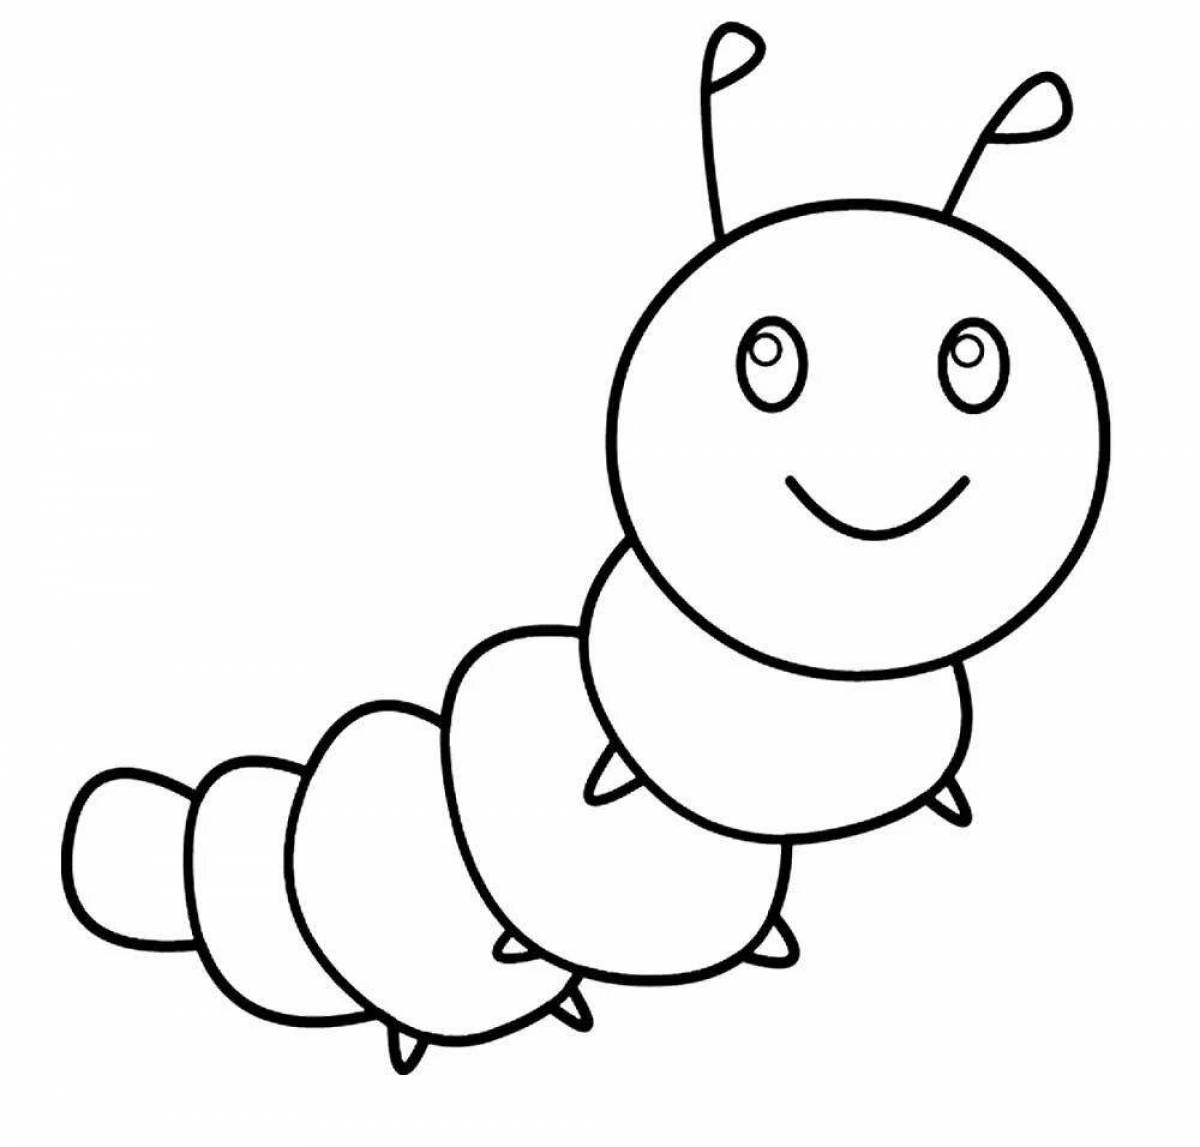 Majestic caterpillar coloring page